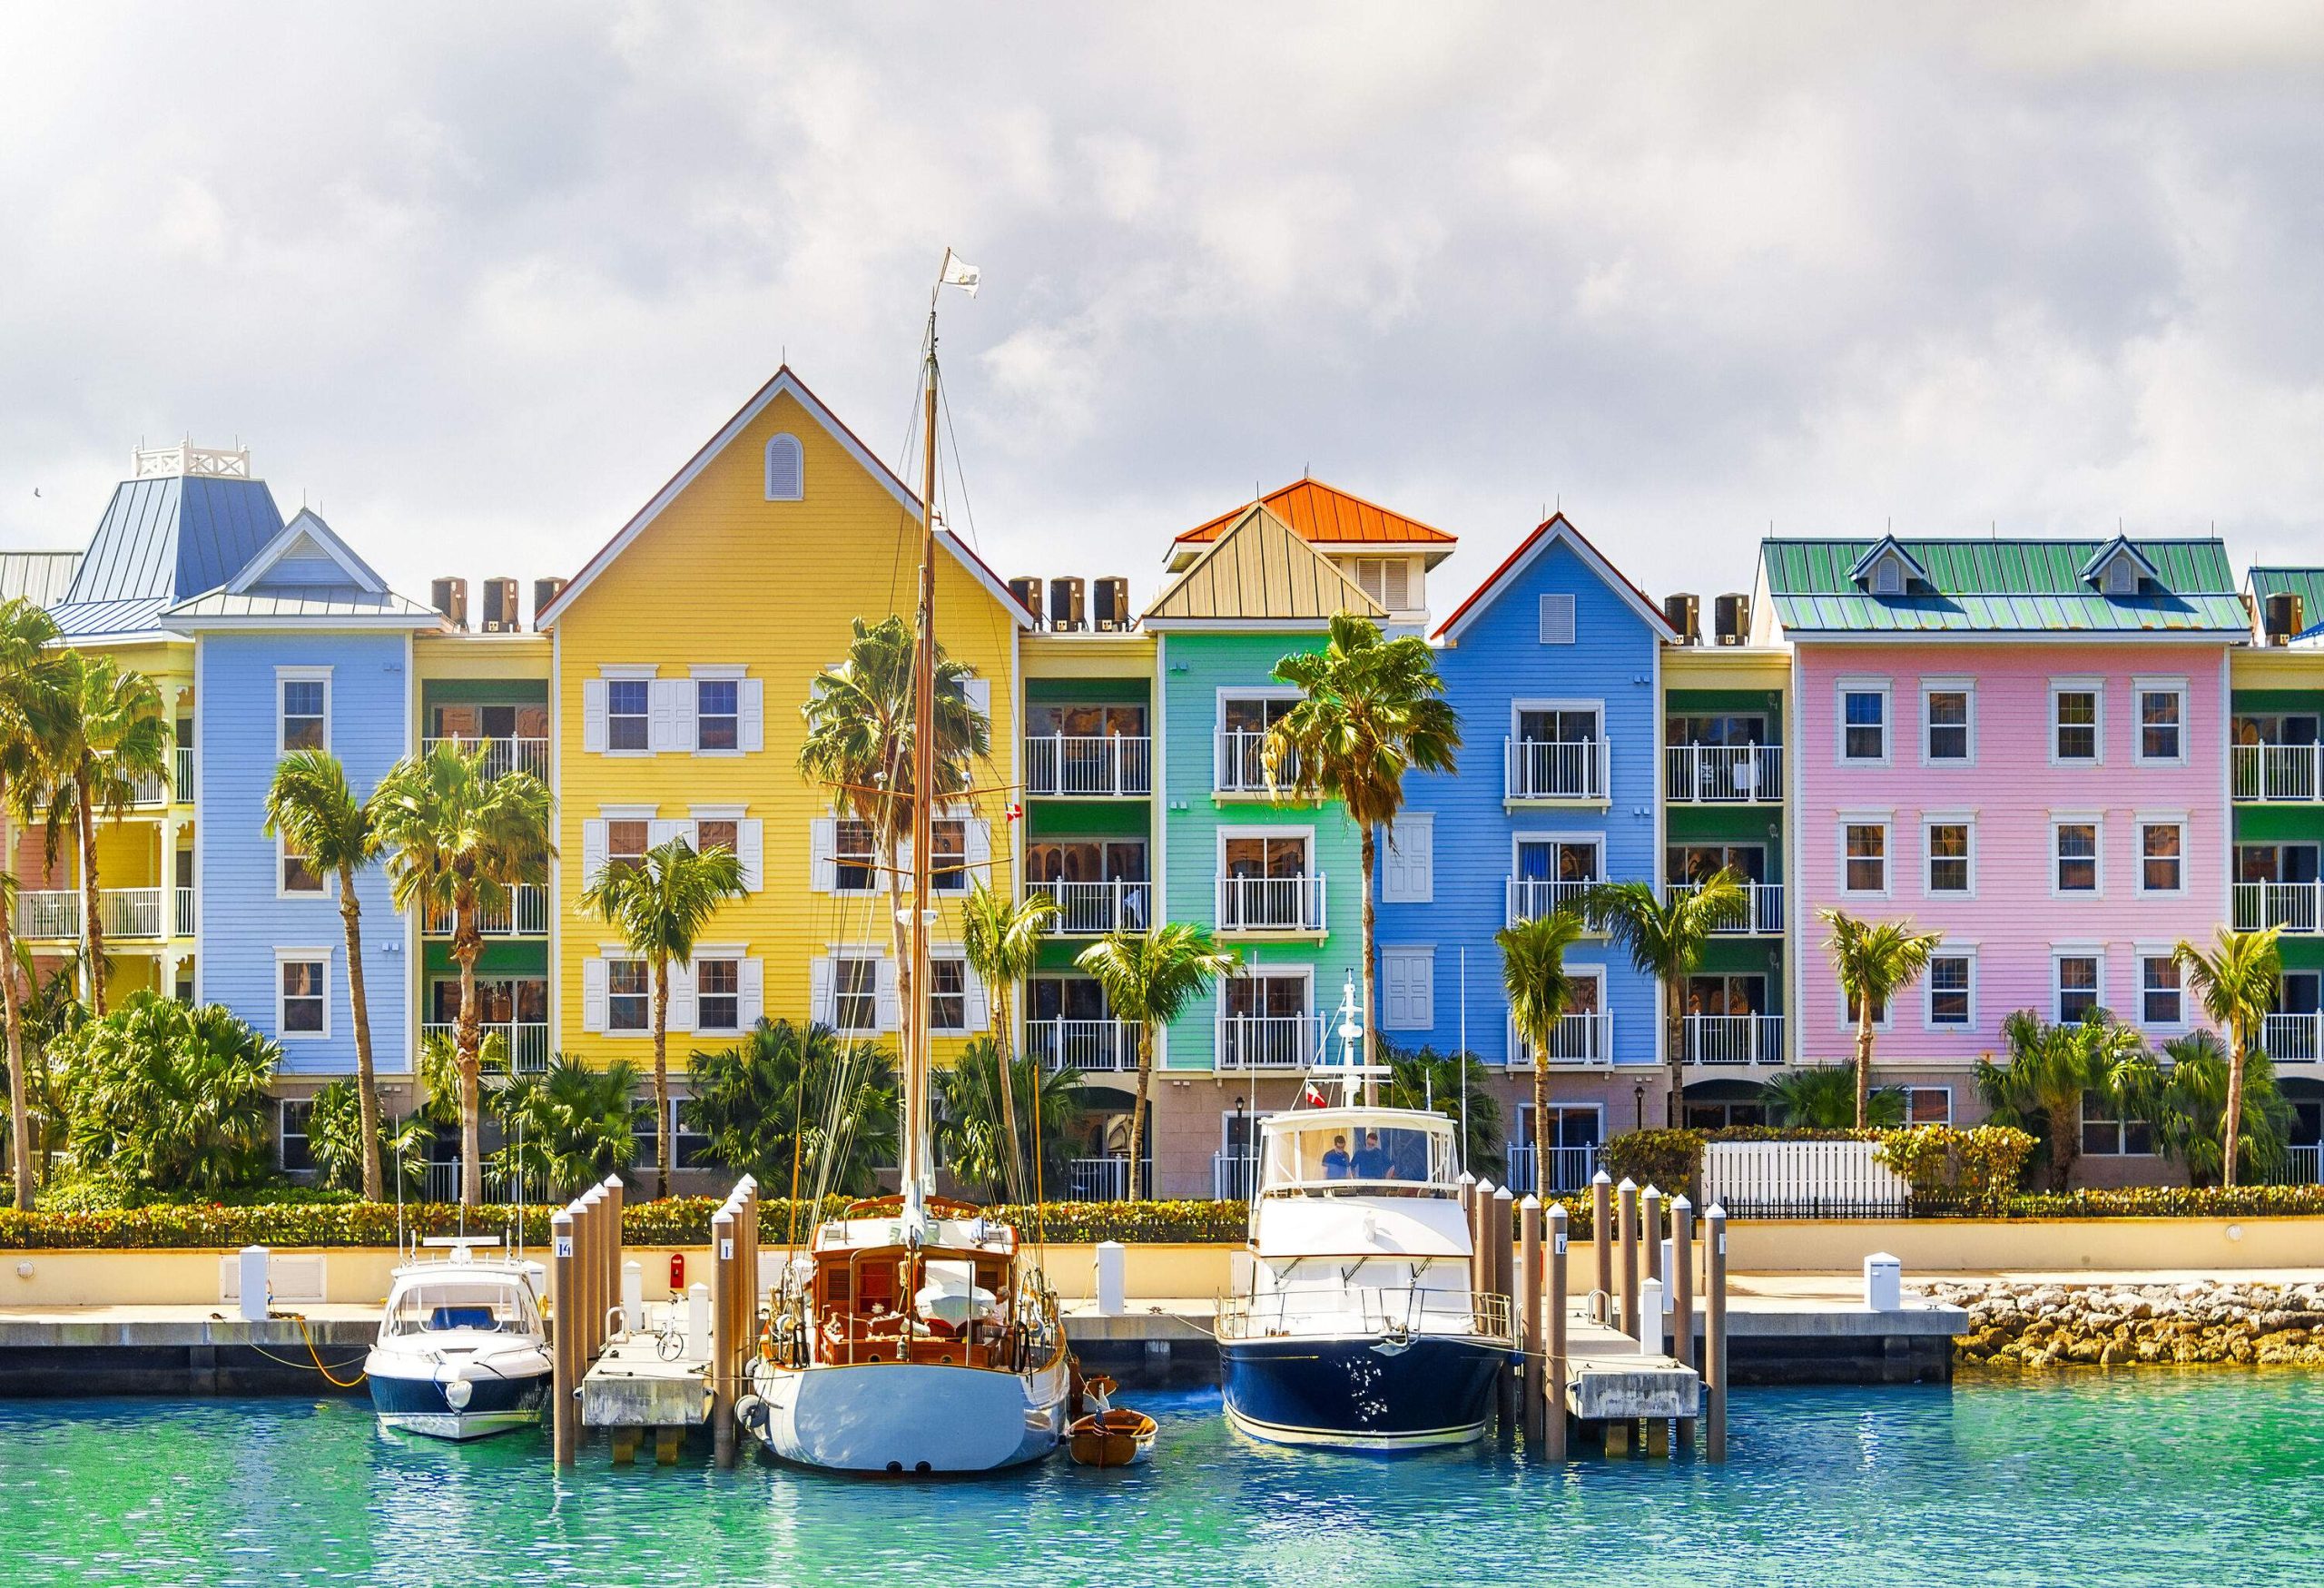 Colourful and modern townhouses on the coastline with moored yachts on the turquoise sea.